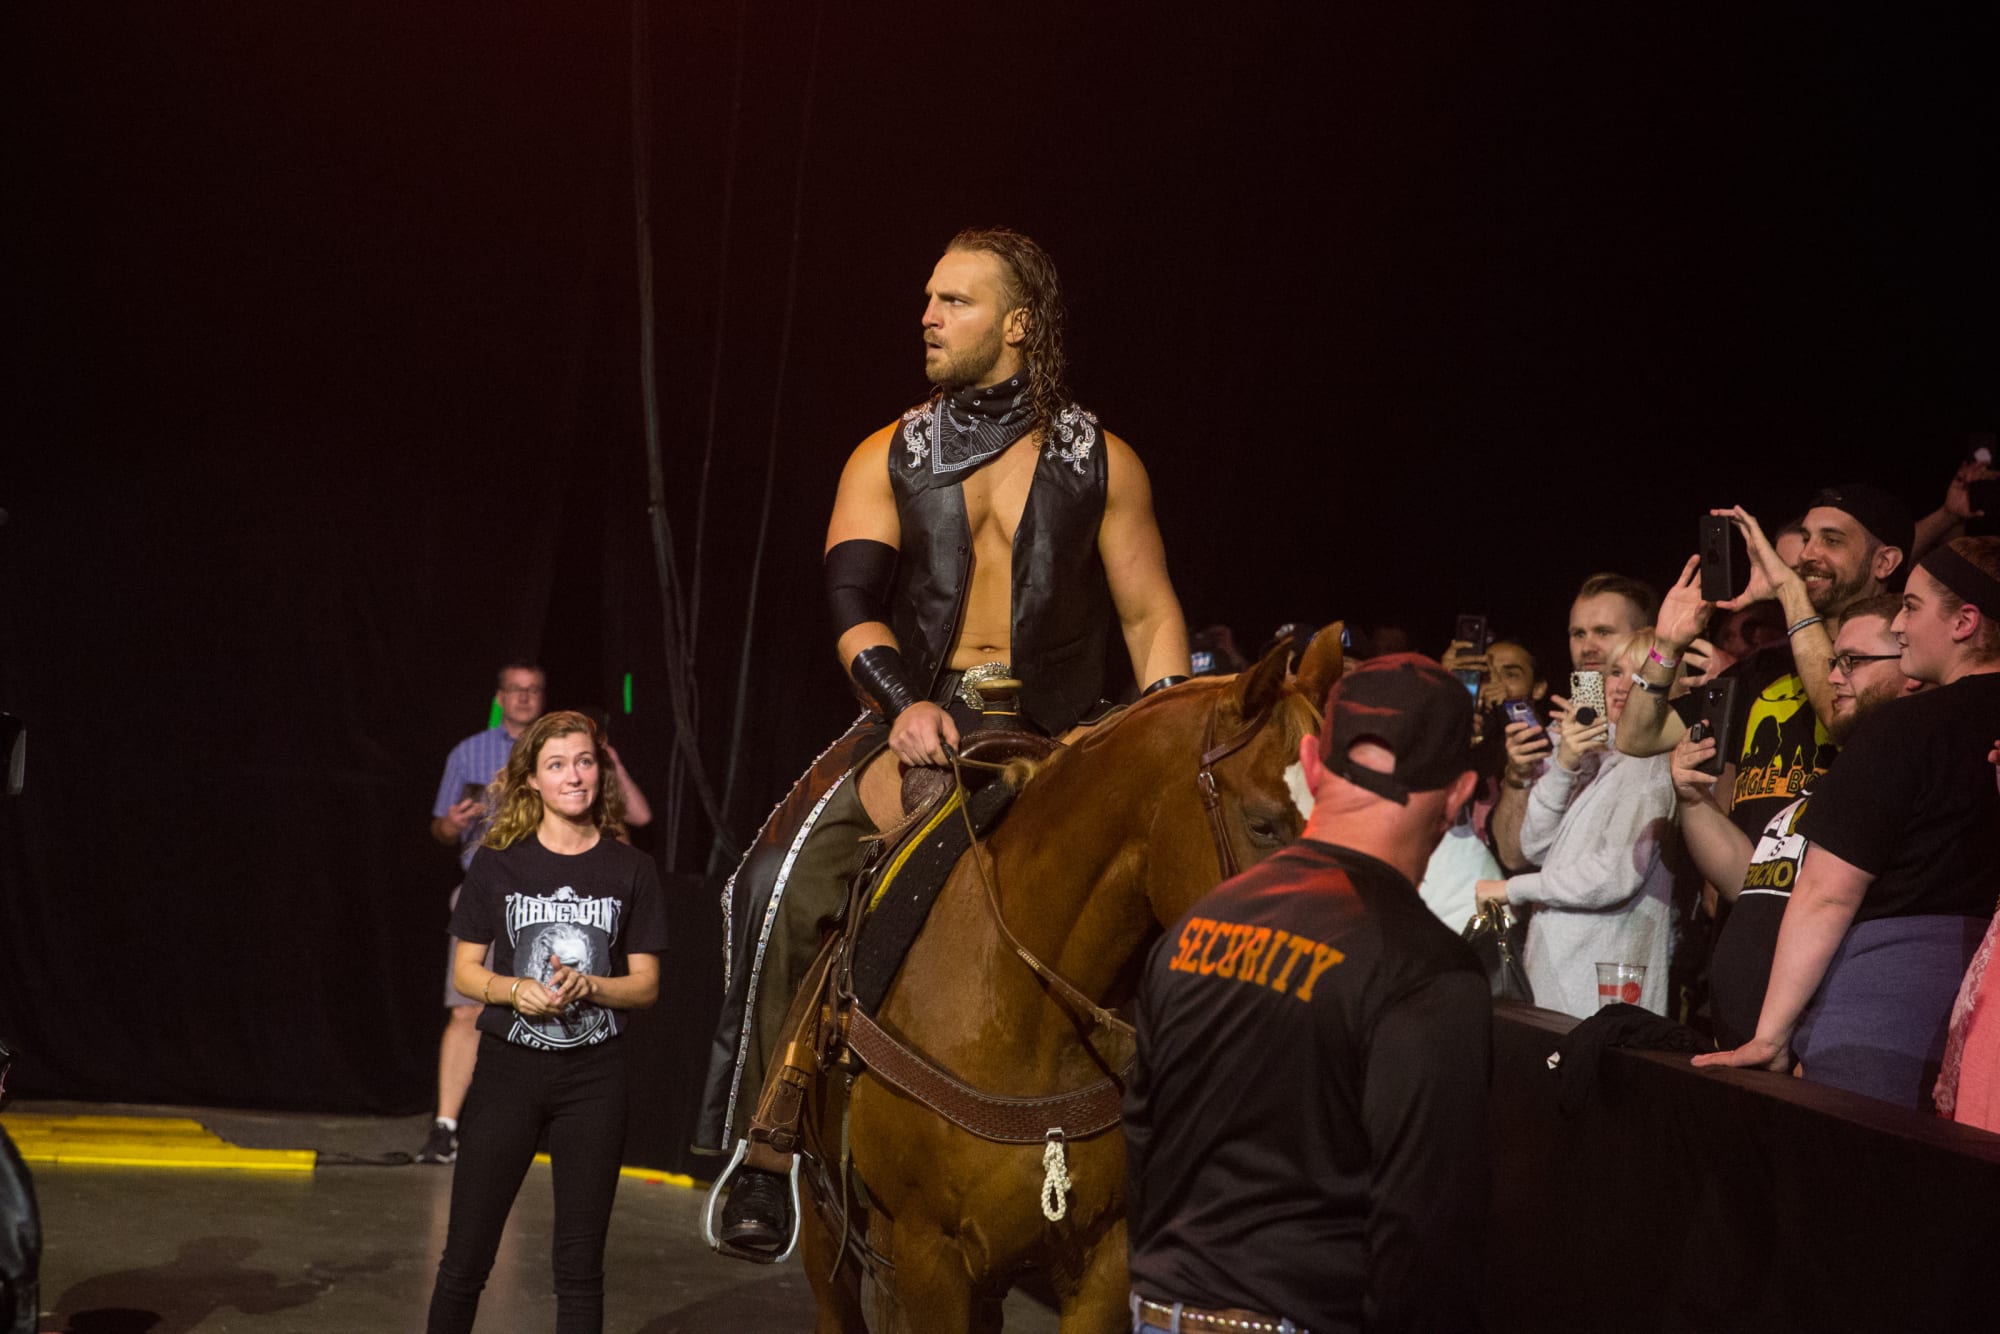 Photo: Possible SPOILER For Adam Page's AEW Full Gear Entrance